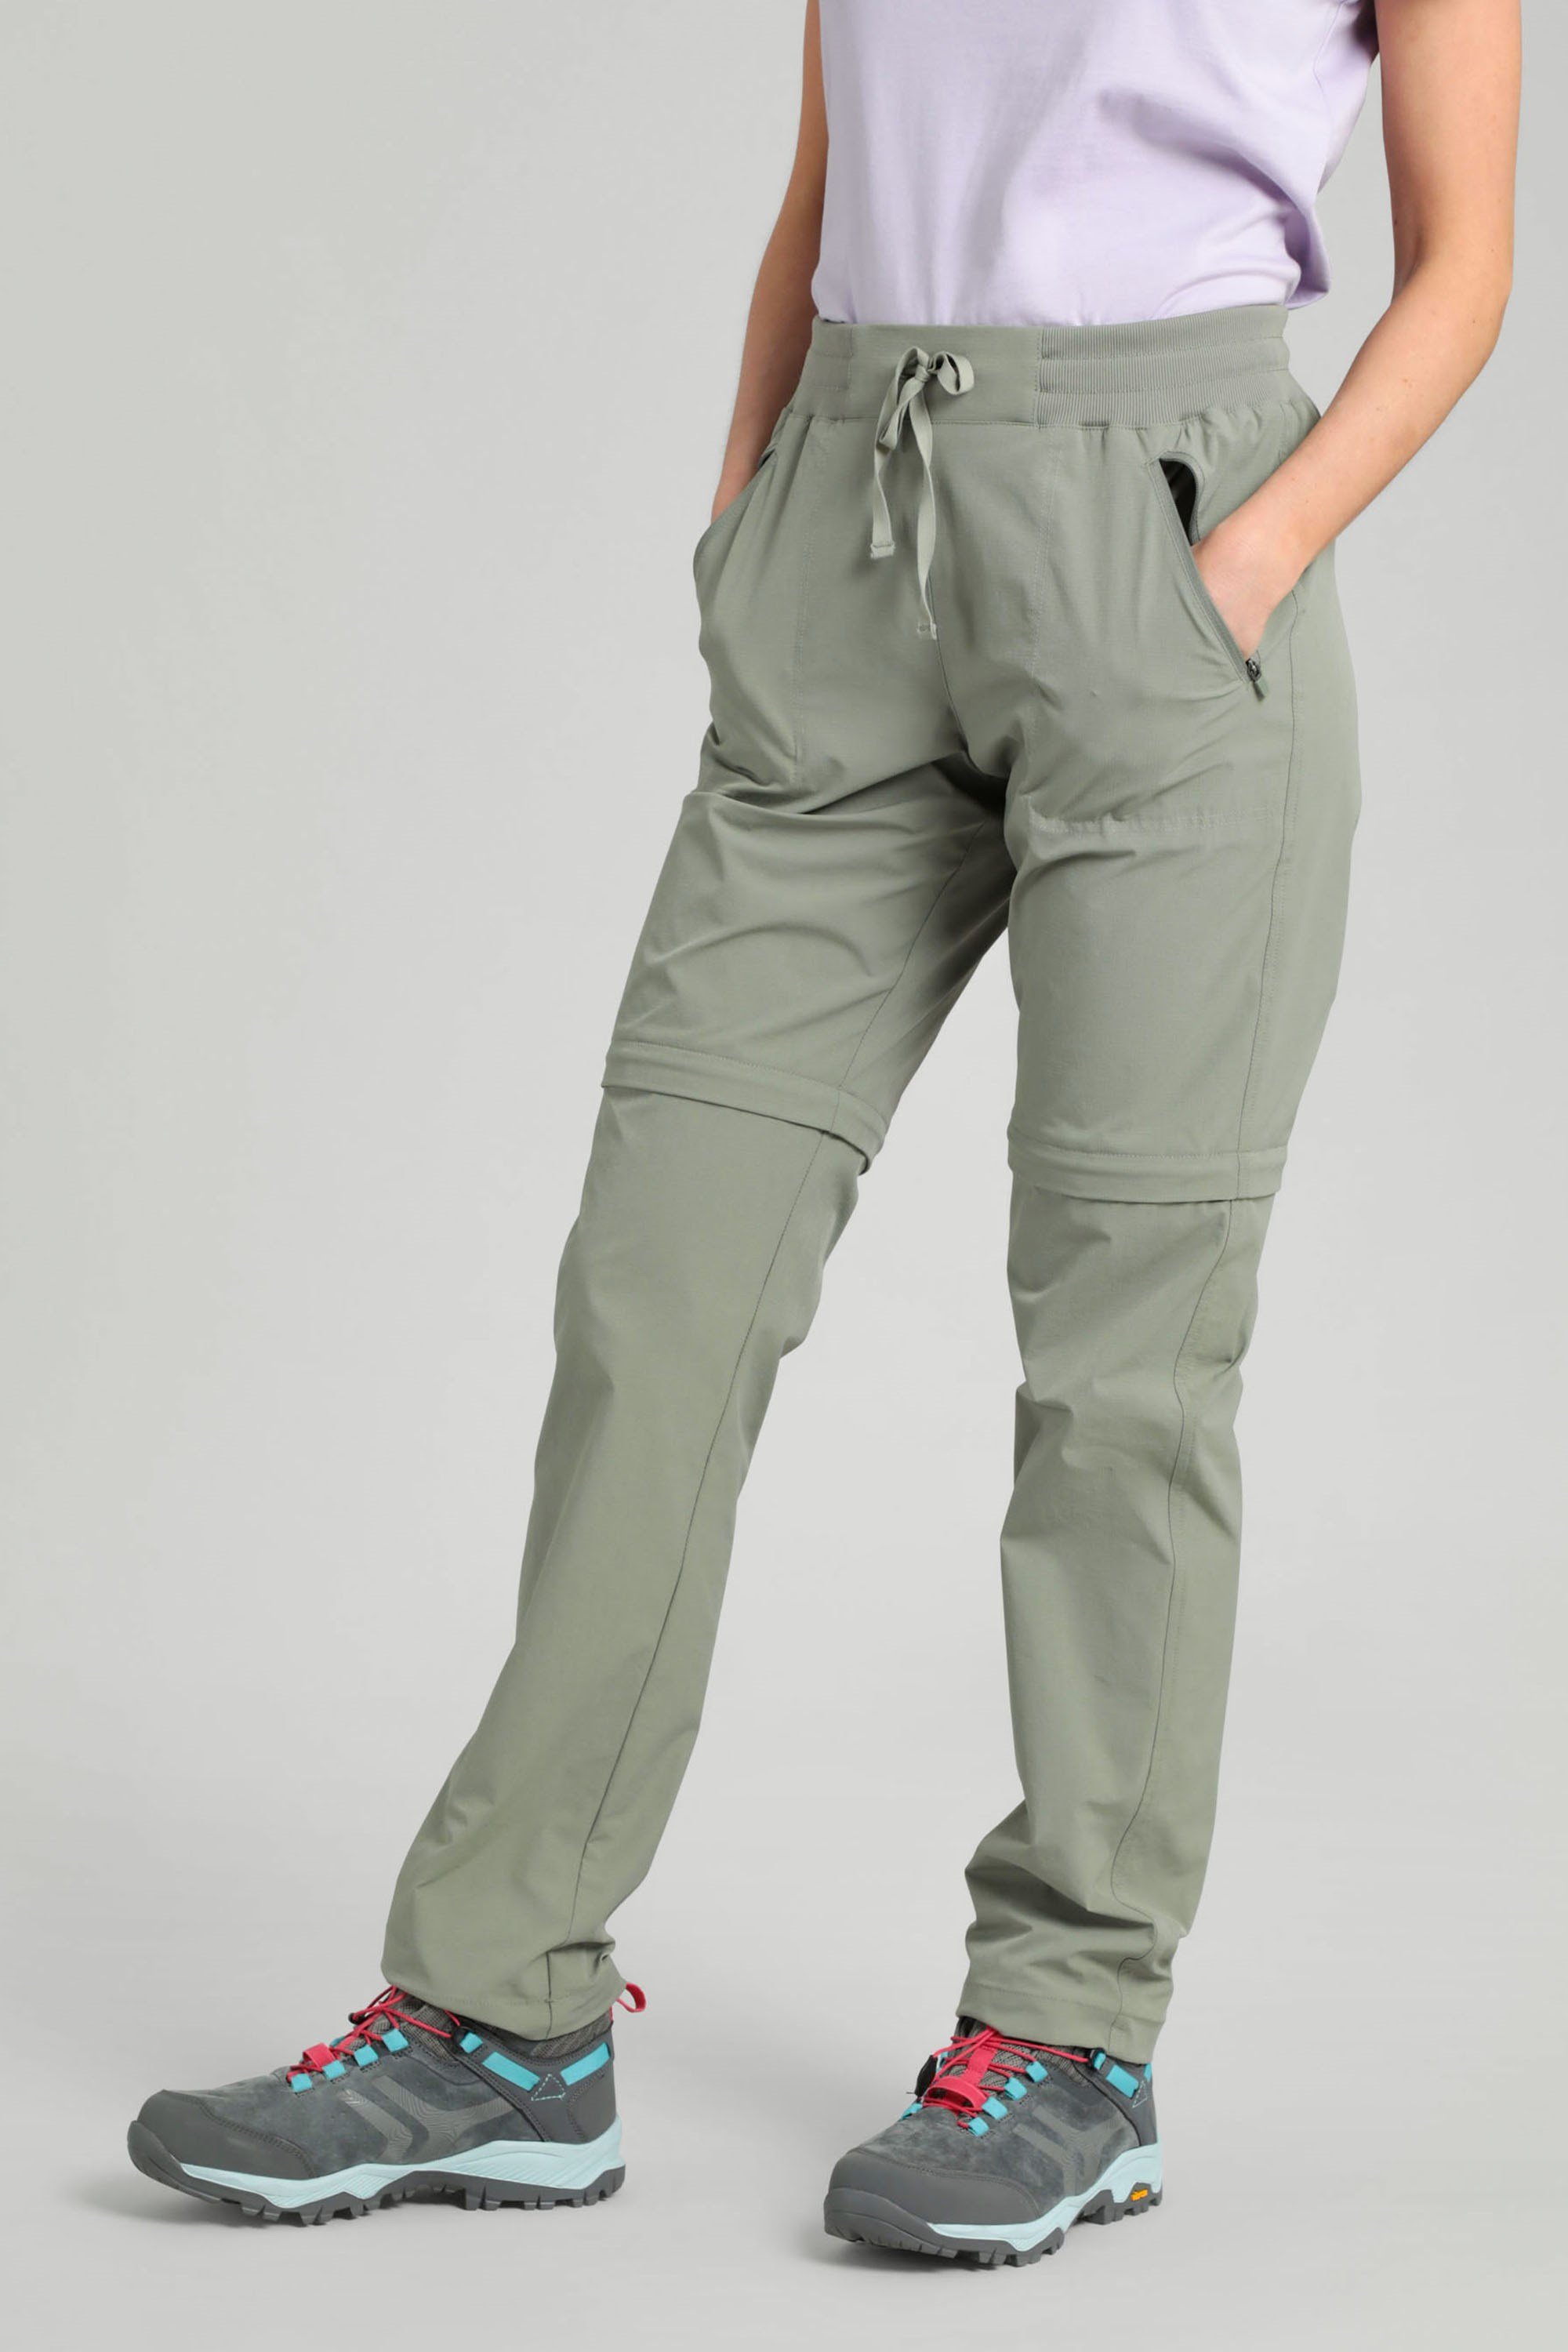 Exploration convertible trousers, grey, The North Face | La Redoute